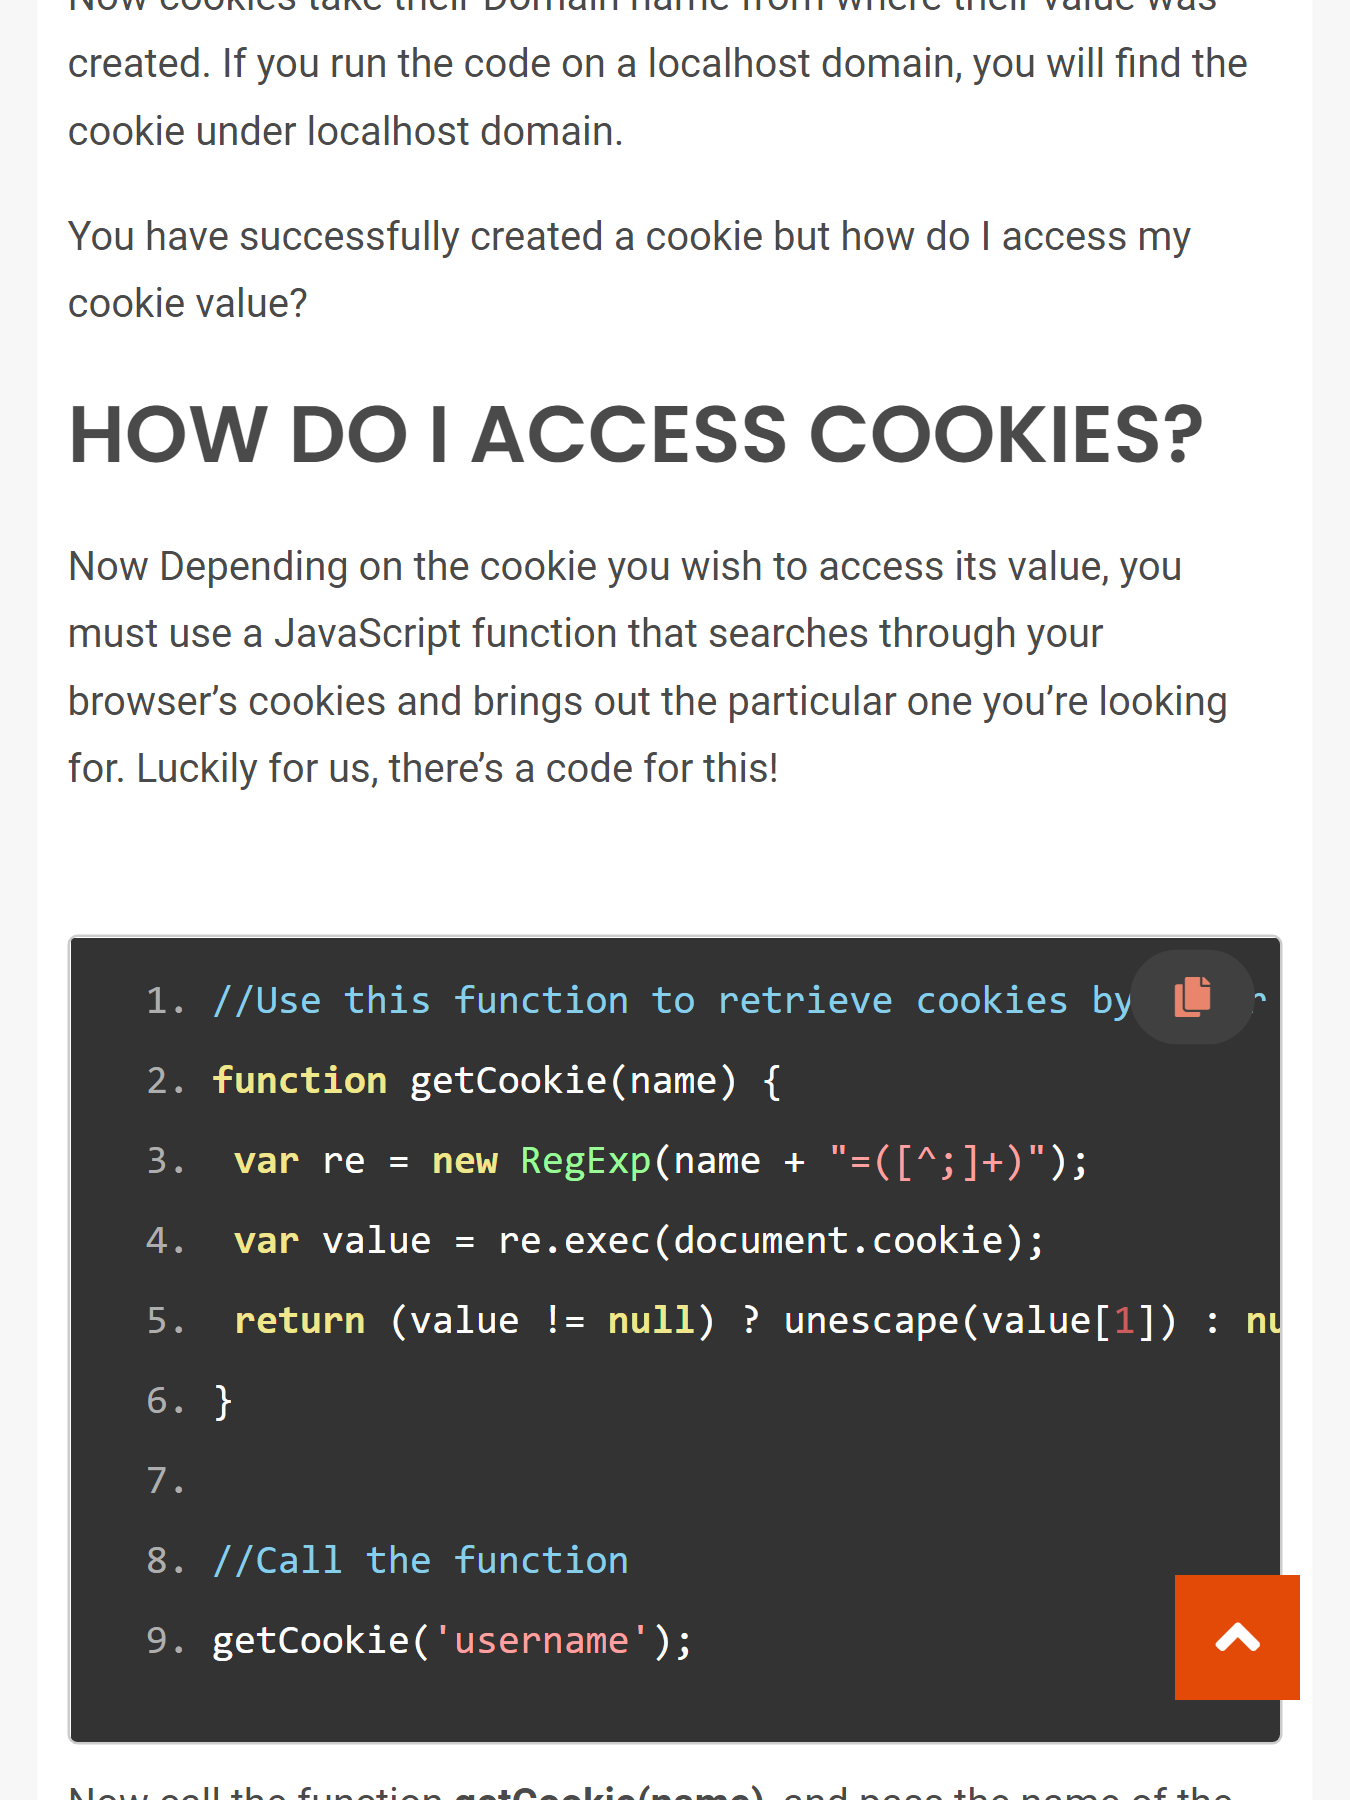 firegist.com.ng_how-to-set-and-retrieve-cookie-values-using-javascript_(Surface Duo).png